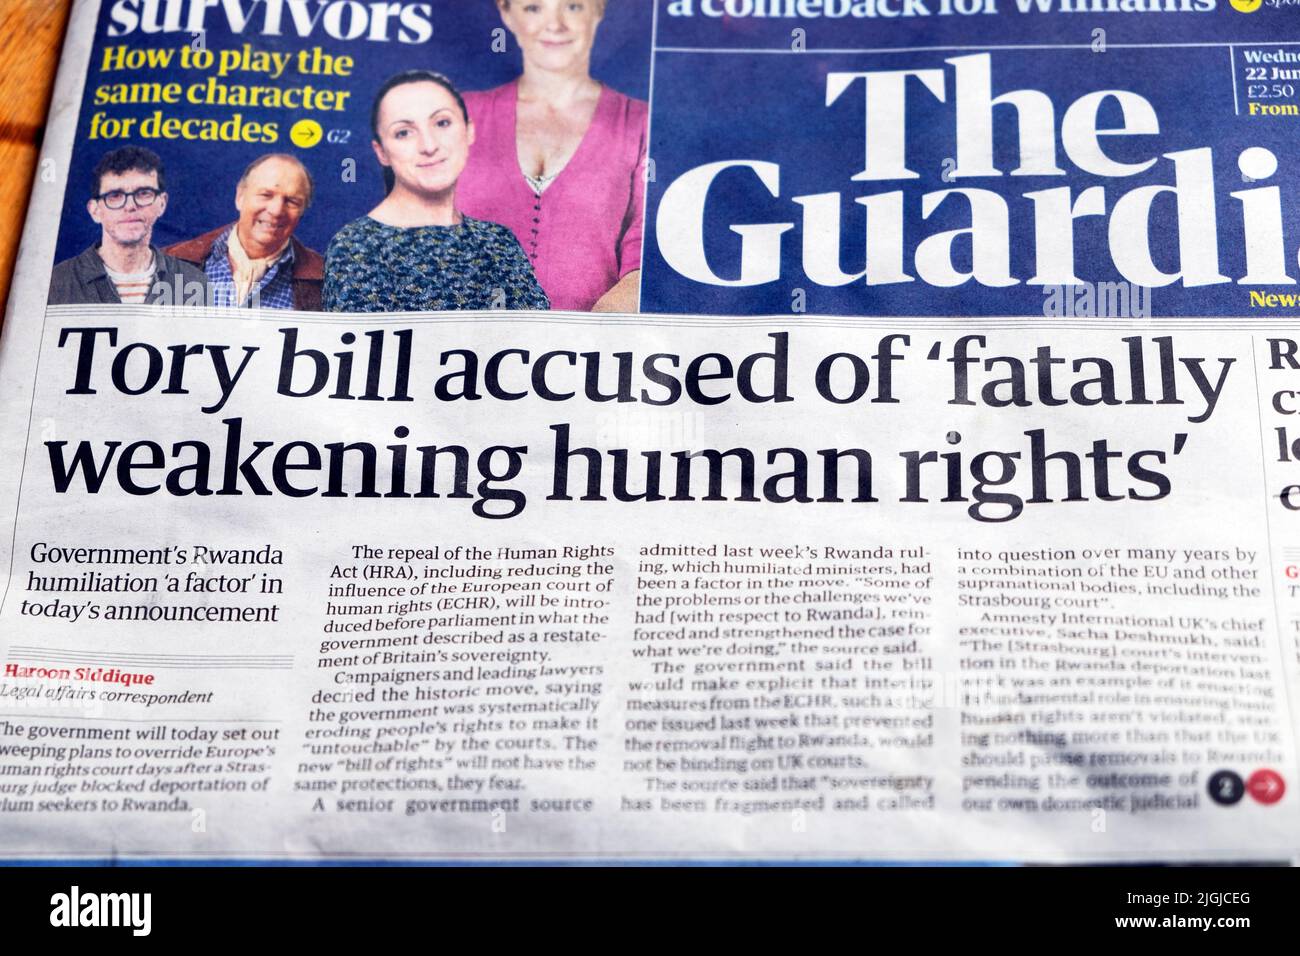 'Tory bill accused of 'fatally weakening human rights' Guardian newspaper ECHR headline front page 22 July 2022 London UK Stock Photo